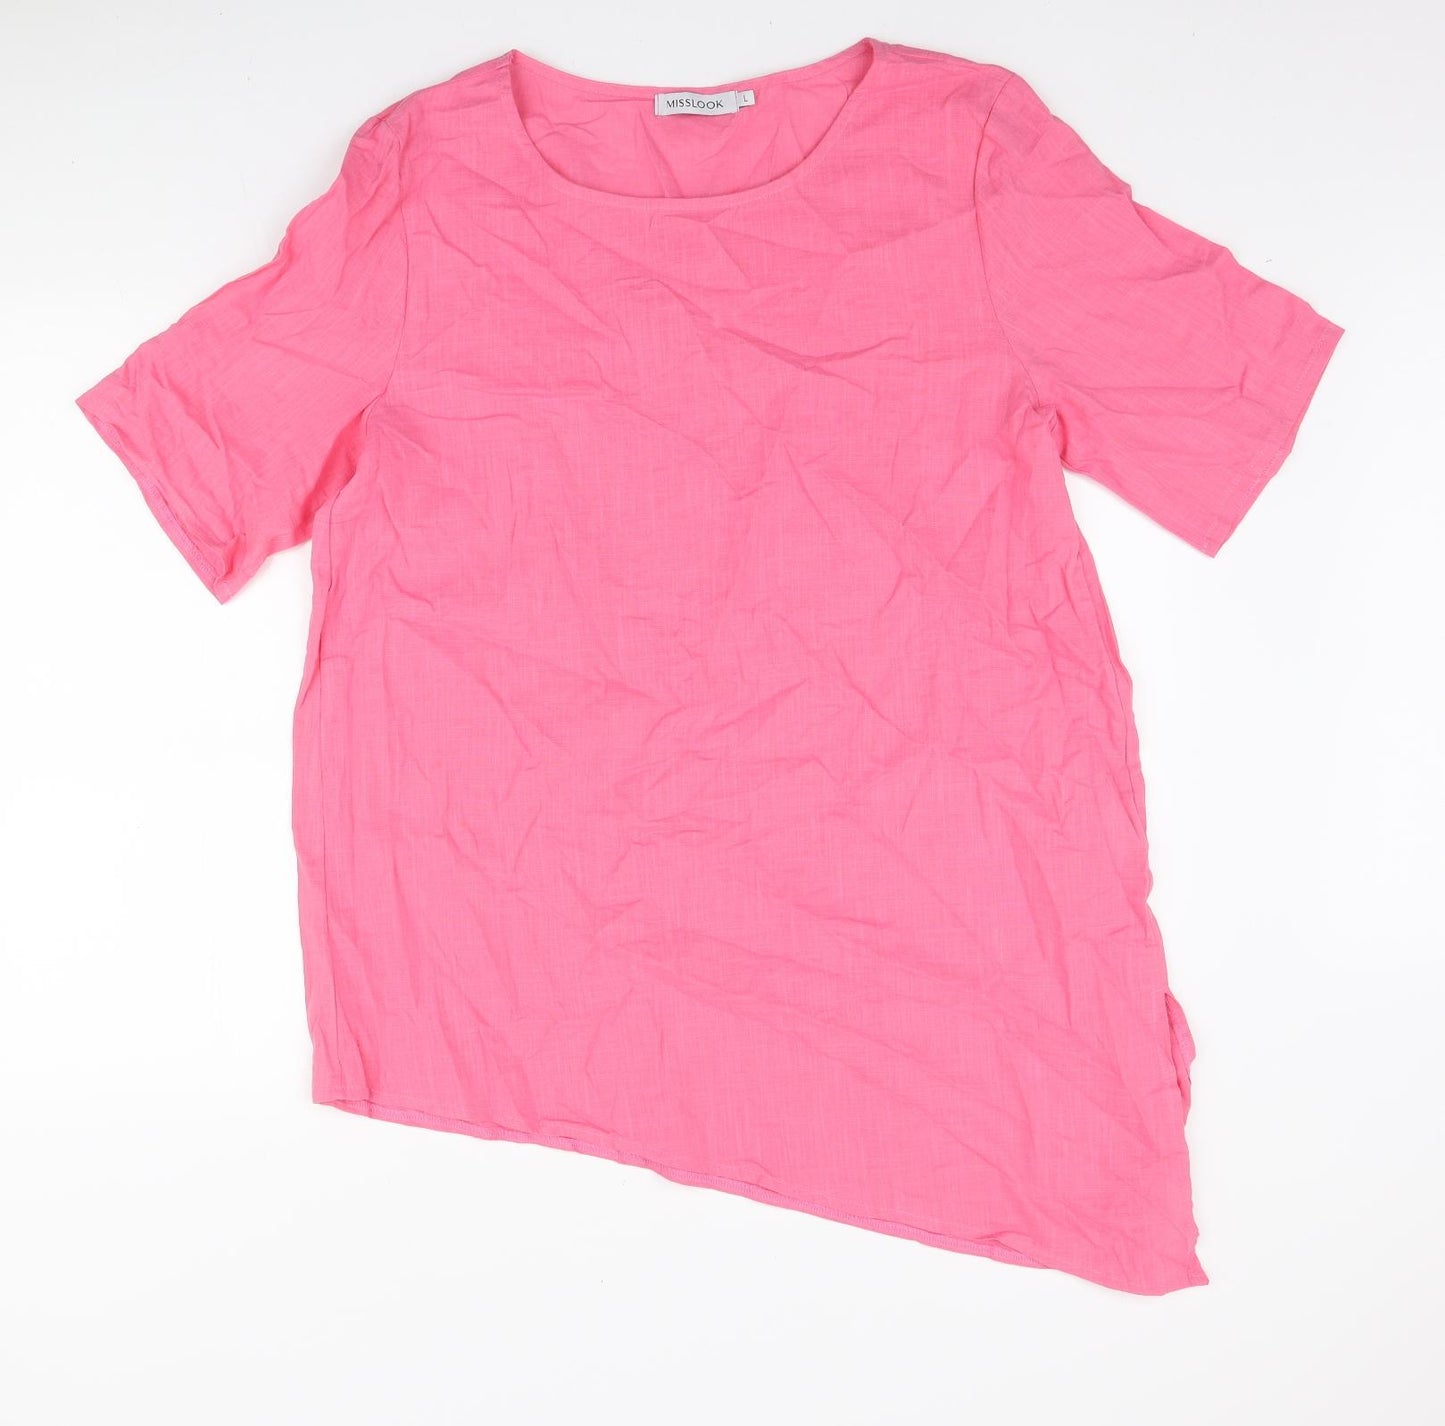 MissLook Womens Pink Polyester Basic T-Shirt Size L Round Neck - Asymmetric